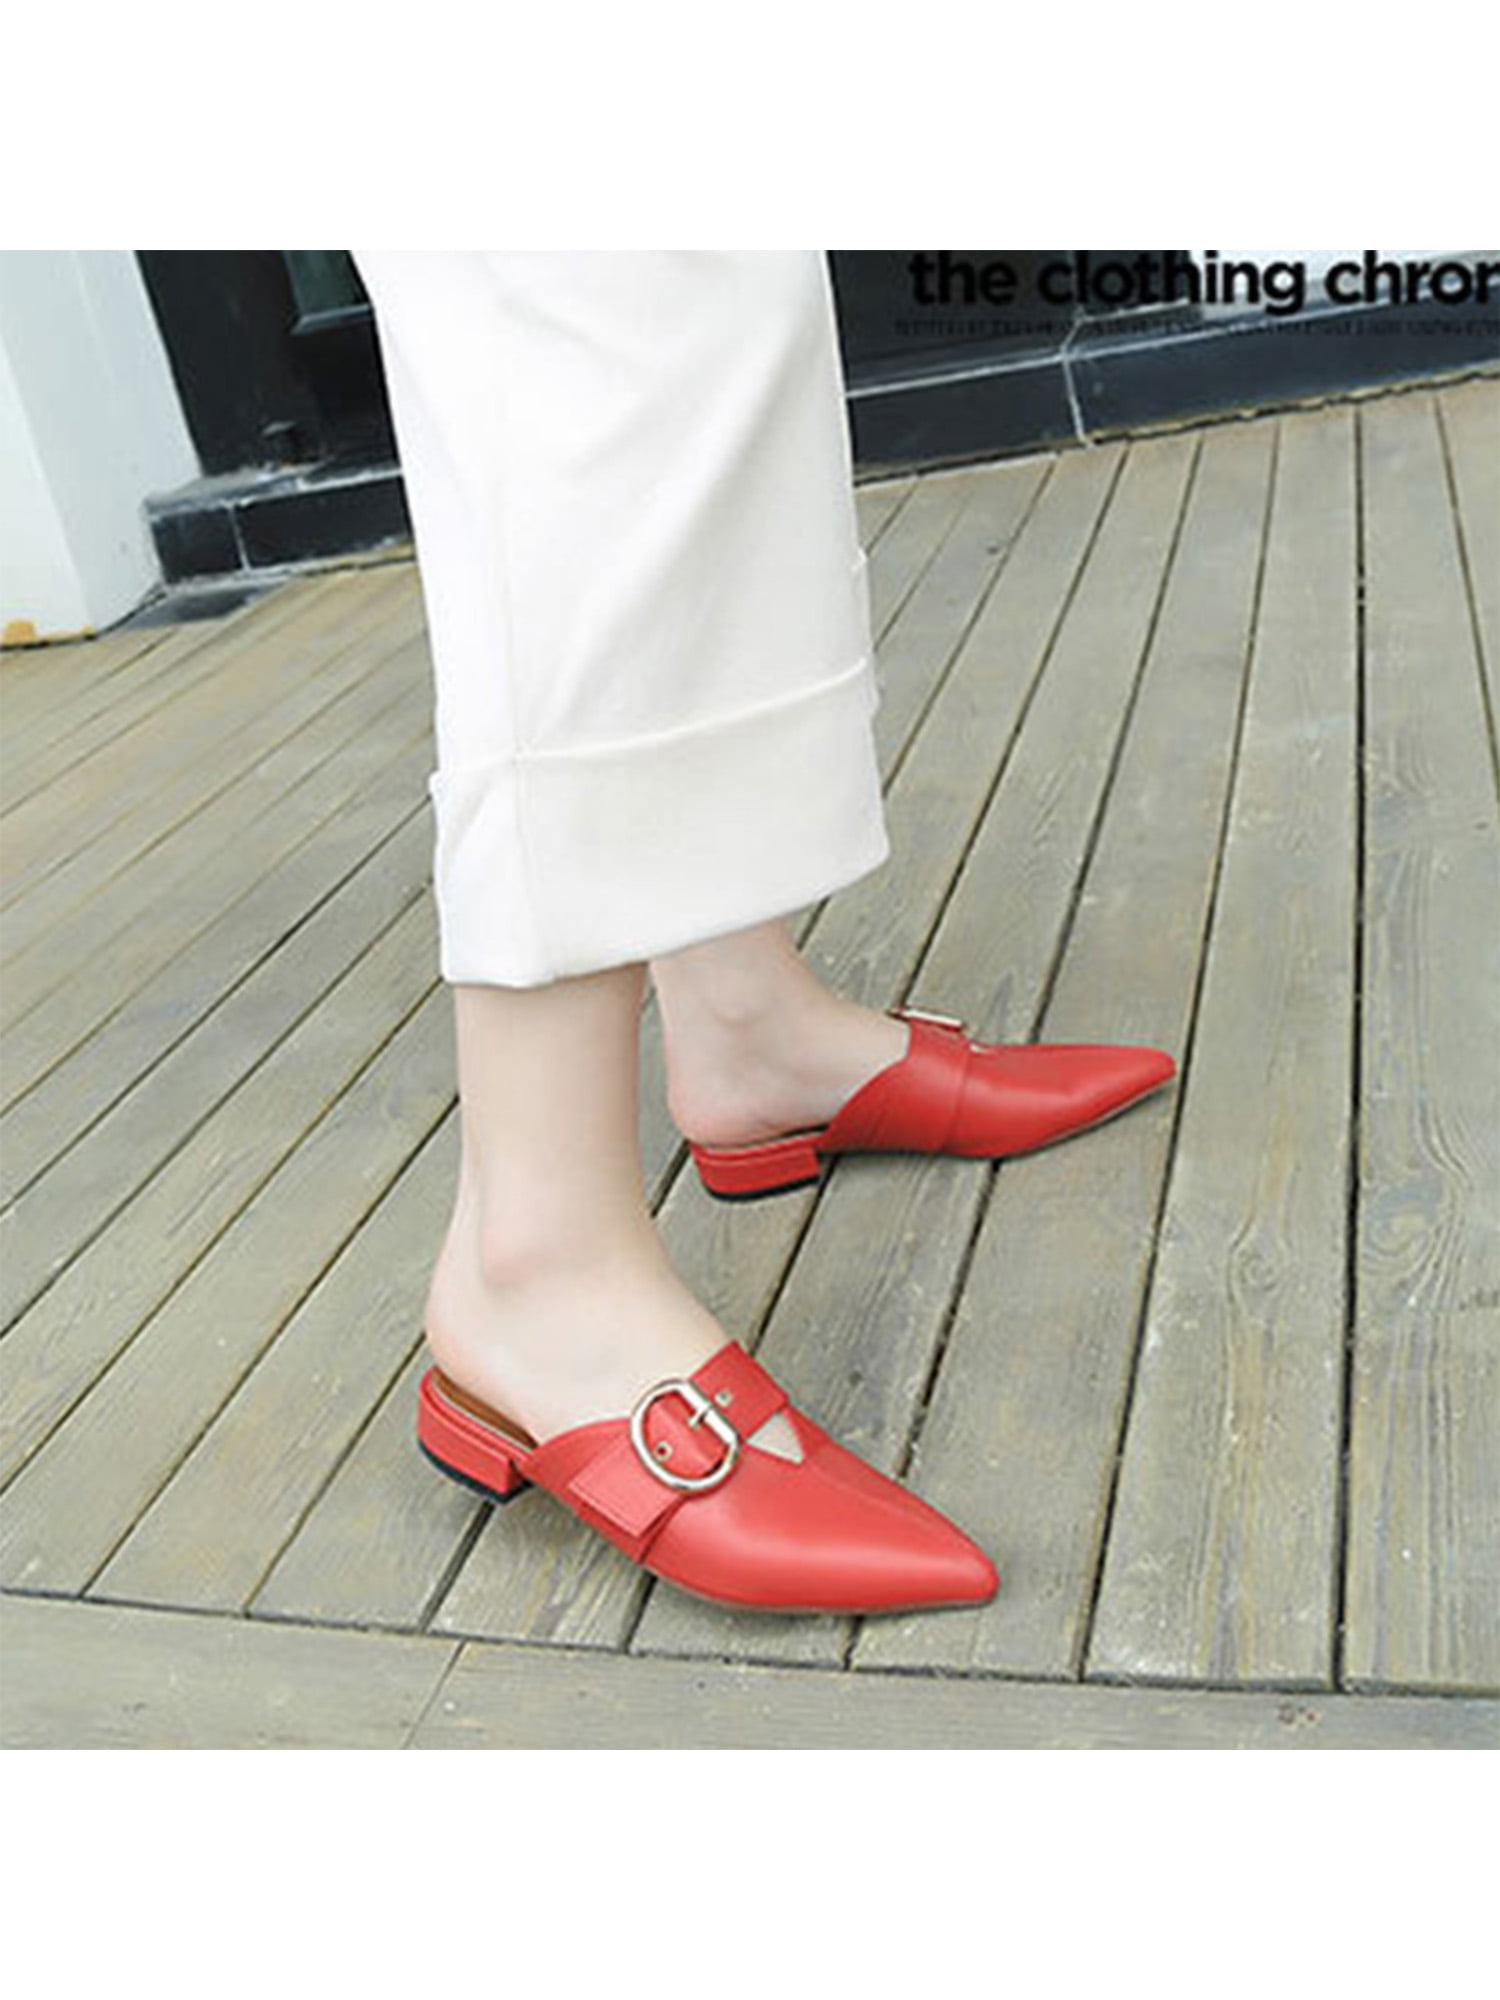 Details about   New Women Rivet Shoes Pointy Flat Shoes Leather Shoes Heel Boat Shoes Shoes